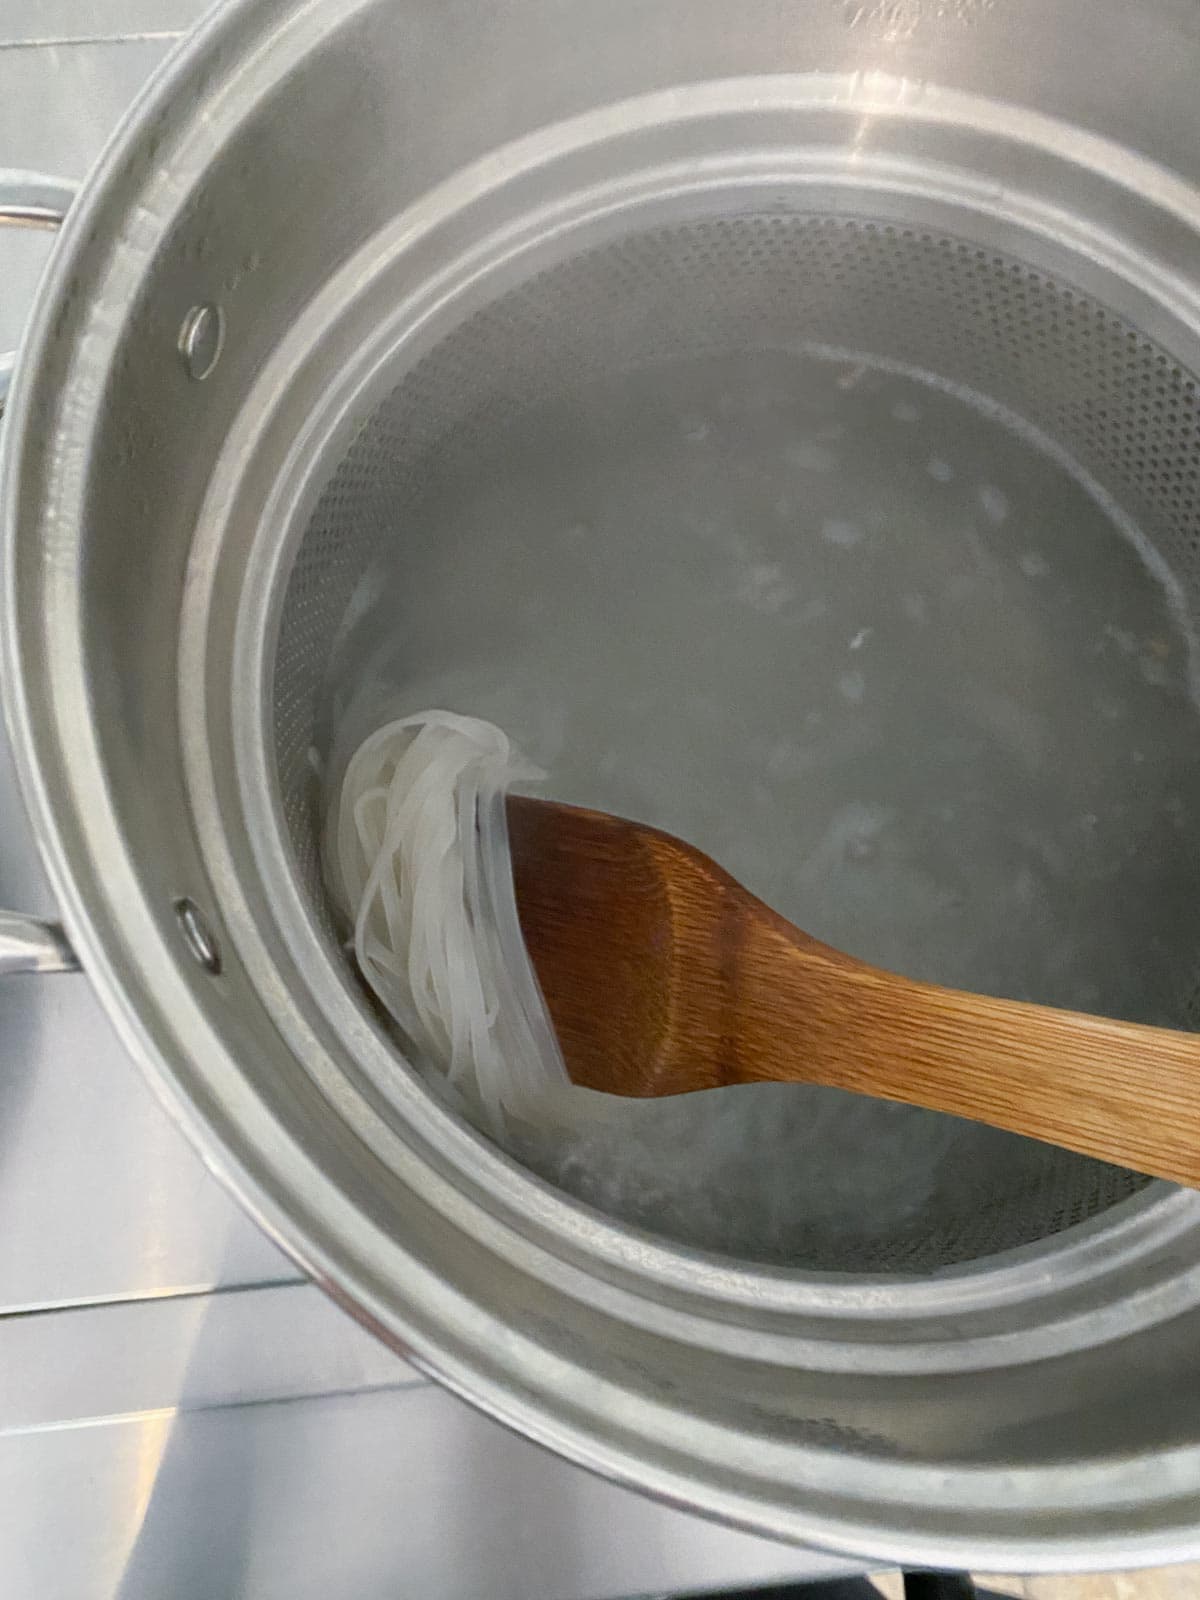 Boiling rice noodles in a big pot.